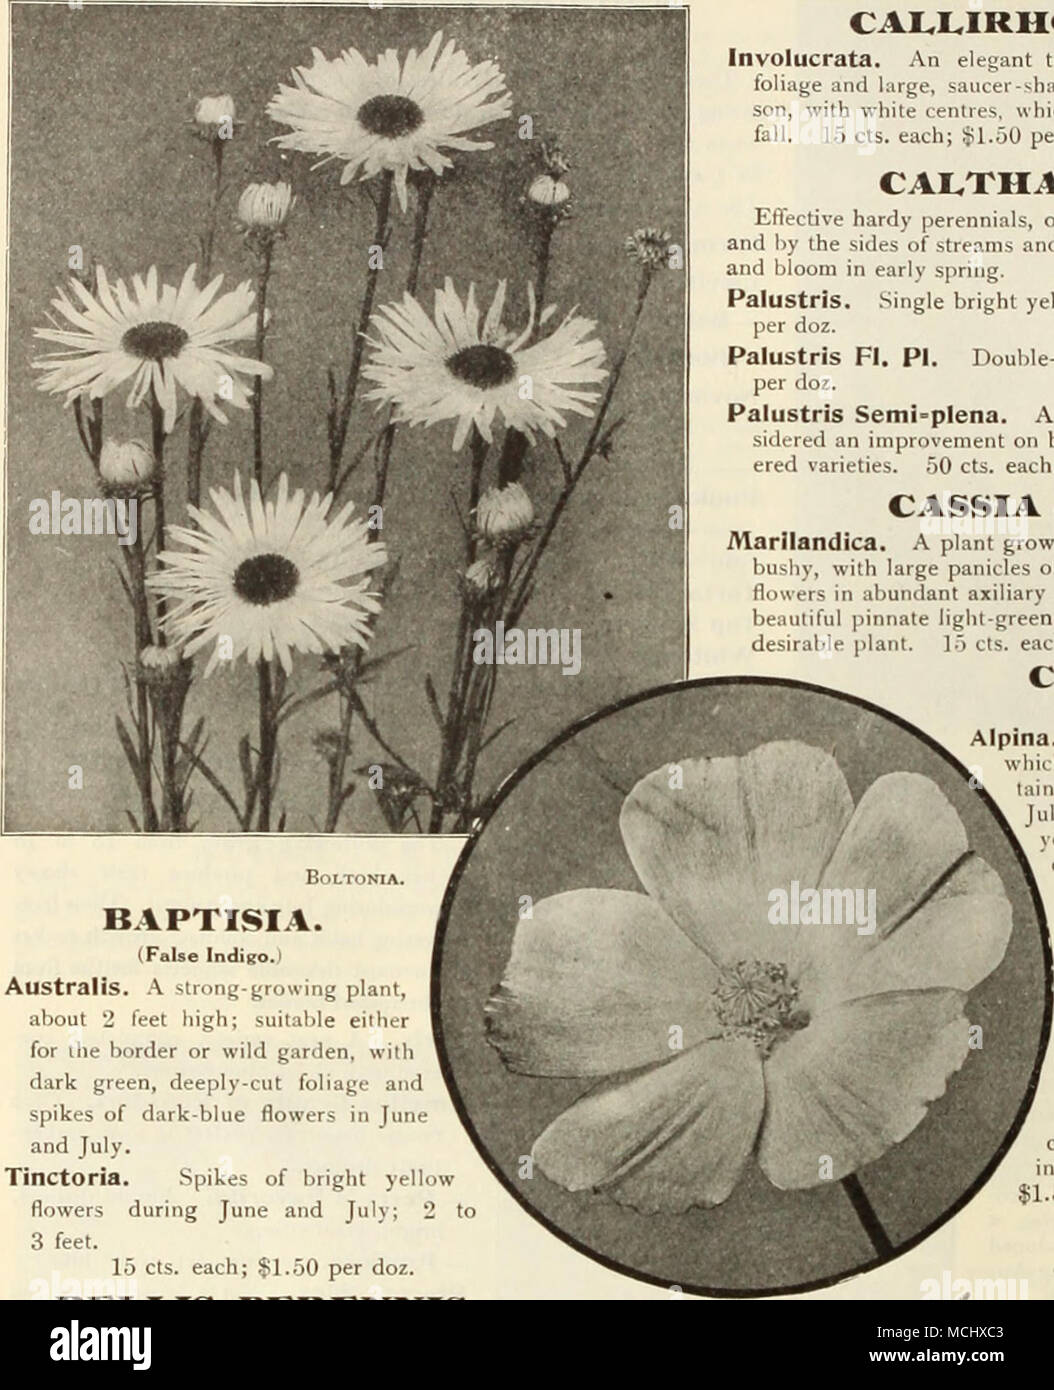 . CAL,]L,IRMO£ (Poppy Mallow). Involucrata. An elegant trailing plant, with fniely-divided foliage and large, saucer-shaped tlowt-is of hright rosy-crim- son, with white centres, which are produced all summer and fall. 15 cts. each; $1.50 per doz.; $10.00 per 100. CAL,THA (Marsh Marigold). Effective hardy perennials, of much value in marshy places and by the sides of streams and ponds; grow about a foot high and bloom in early spring. Palustris. Single bright yellow flowers. 15 cts. each; $1.50 er doz. Palustris Fl. PI. Double-flowering. 25 cts. each; §2.50 per doz. Palustris Semi-plena. A new Stock Photo